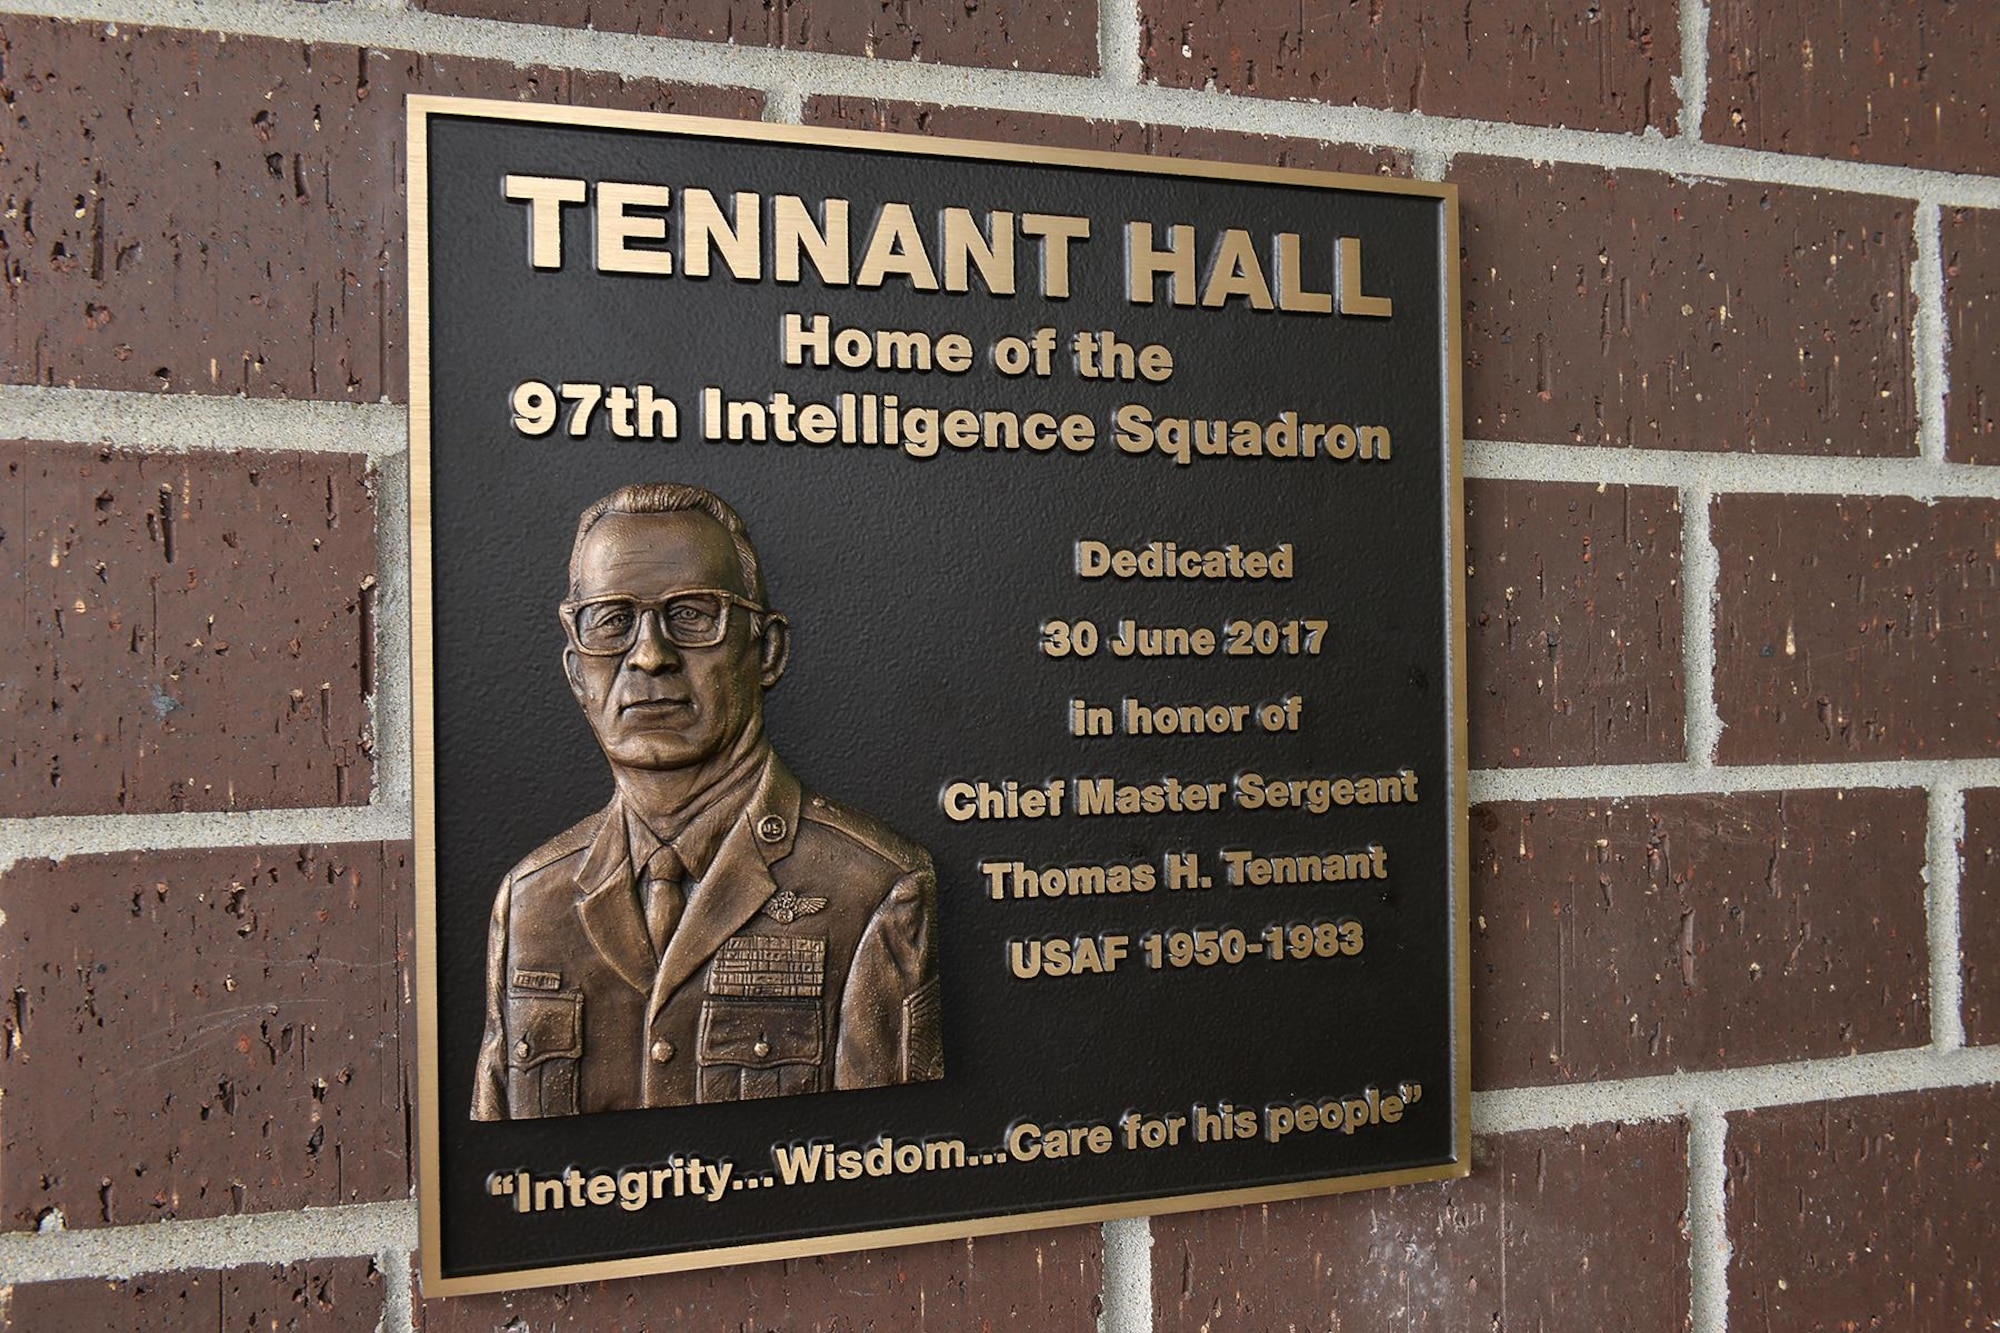 A plaque highlighting the career of retired Chief Master Sgt. Thomas H. Tennant is on display at Tennant Hall, the home of the 97th Intelligence Squadron here. The facility was dedicated to Tennant during a ceremony on June 30. (U.S. Air Force photo by Charles Haymond)